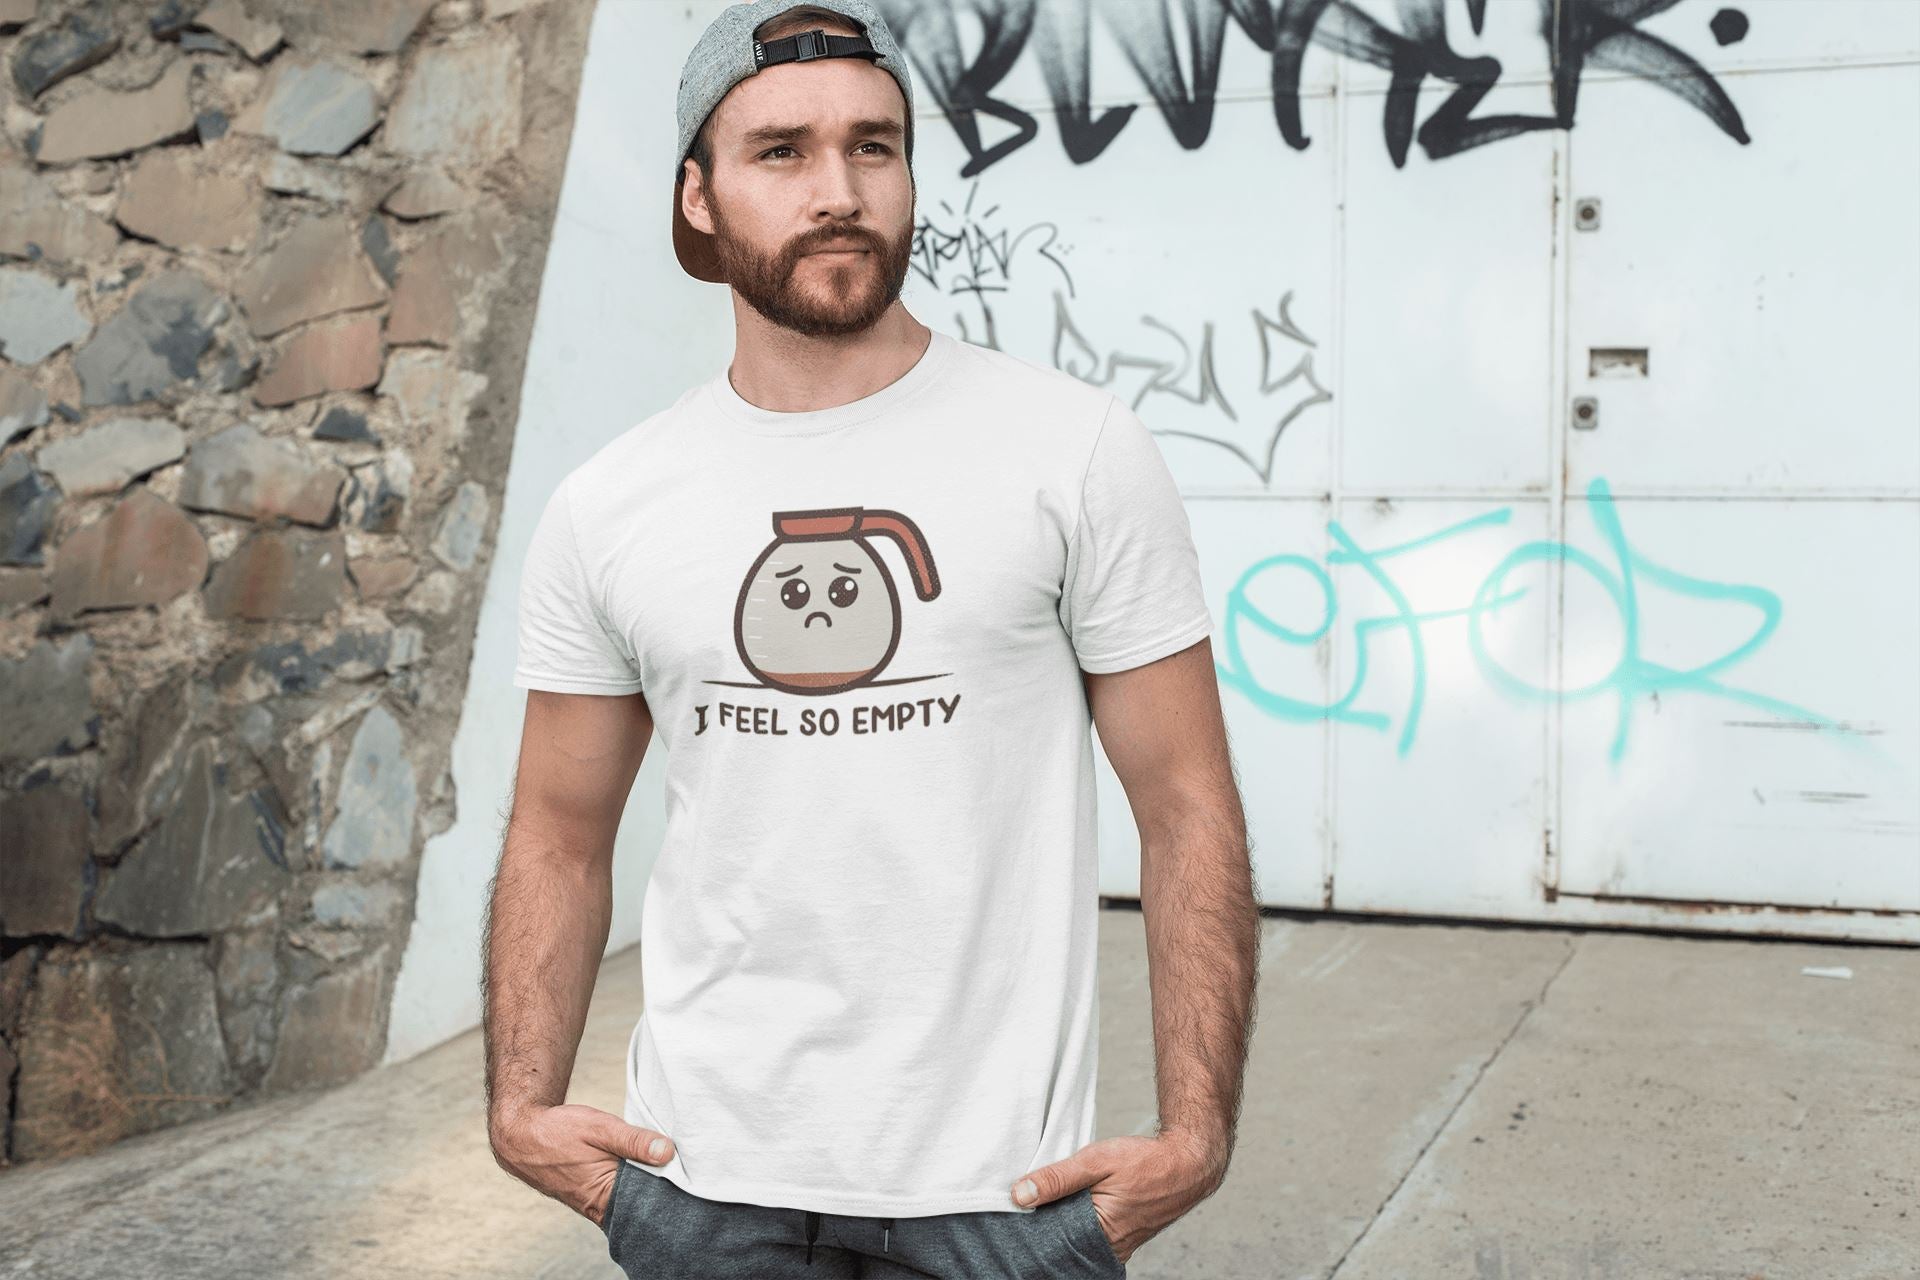 I Feel So Empty Cute T Shirt for Men and Women | Premium Design | Catch My Drift India - Catch My Drift India  clothing, female, general, made in india, shirt, t shirt, trending, tshirt, whit